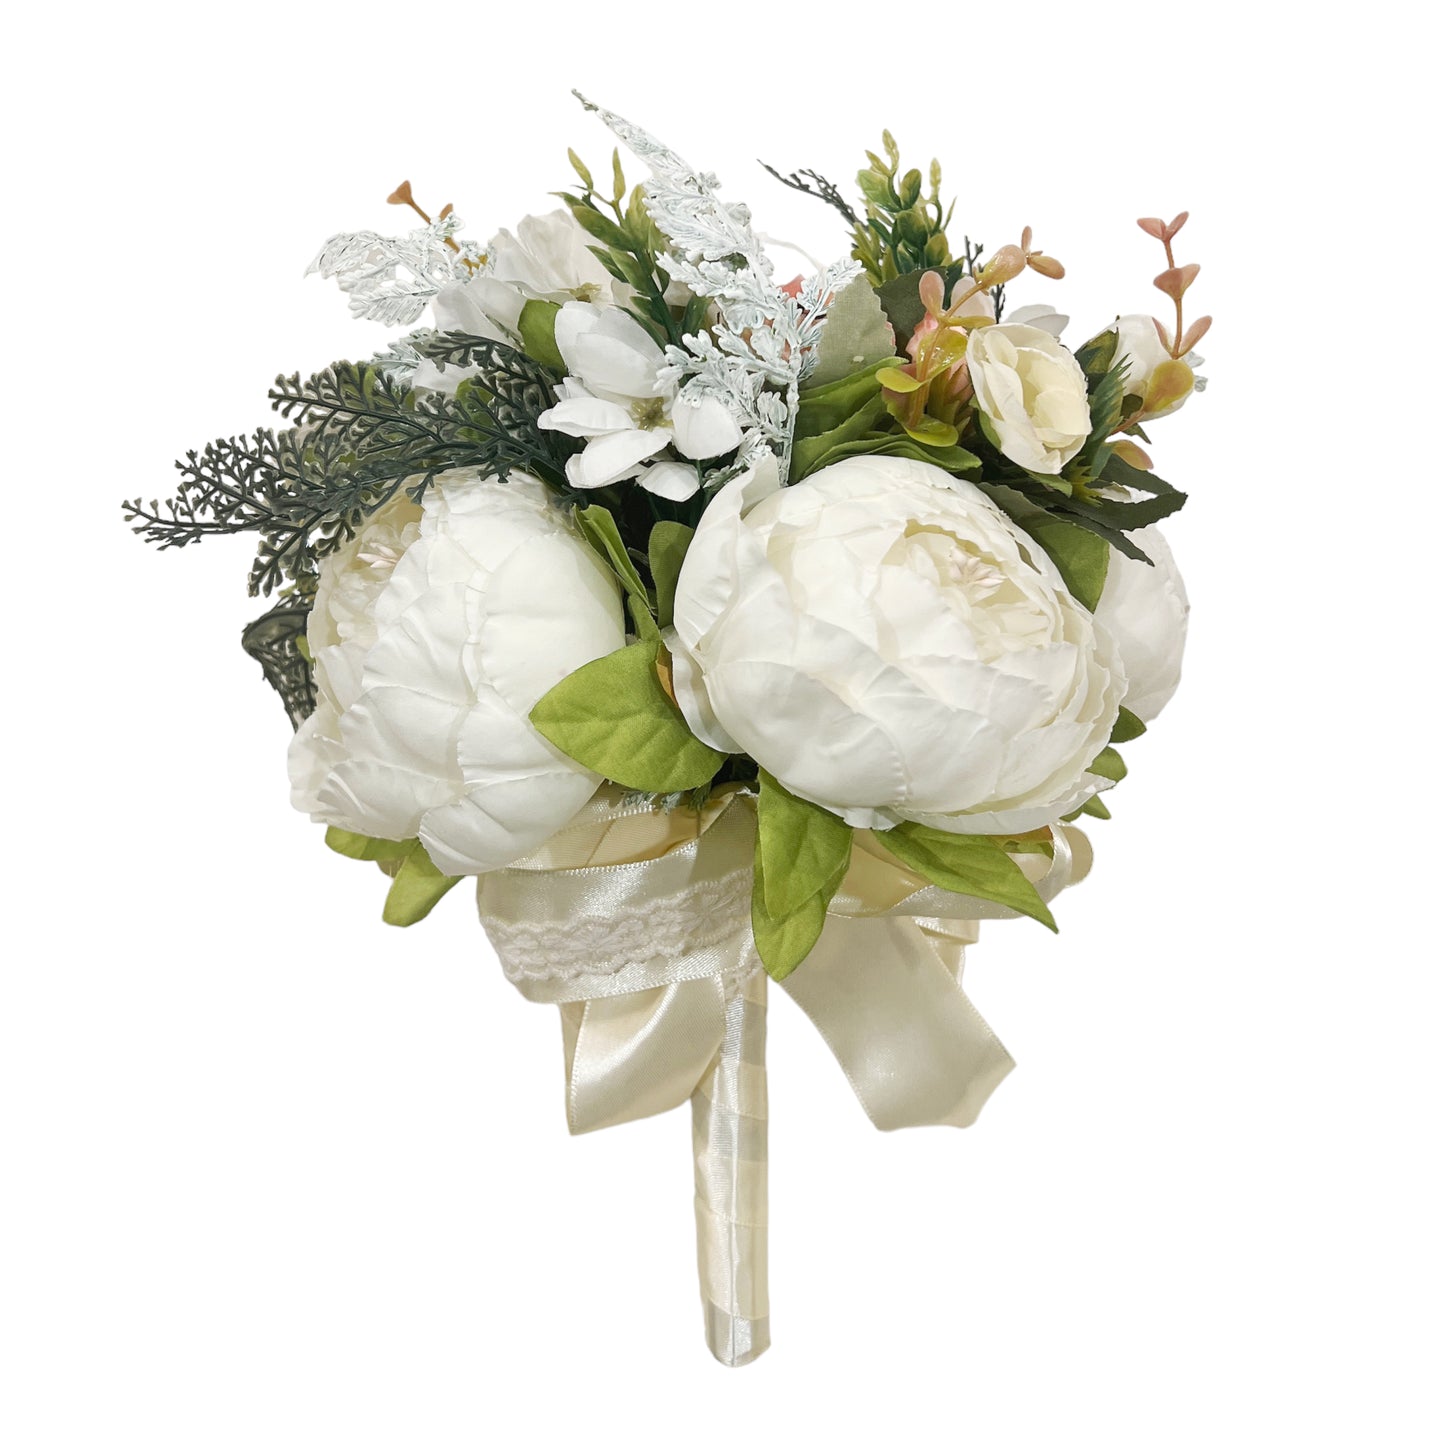 Exquisite Artificial Peony Wedding Bouquet for Bride and Bridesmaid